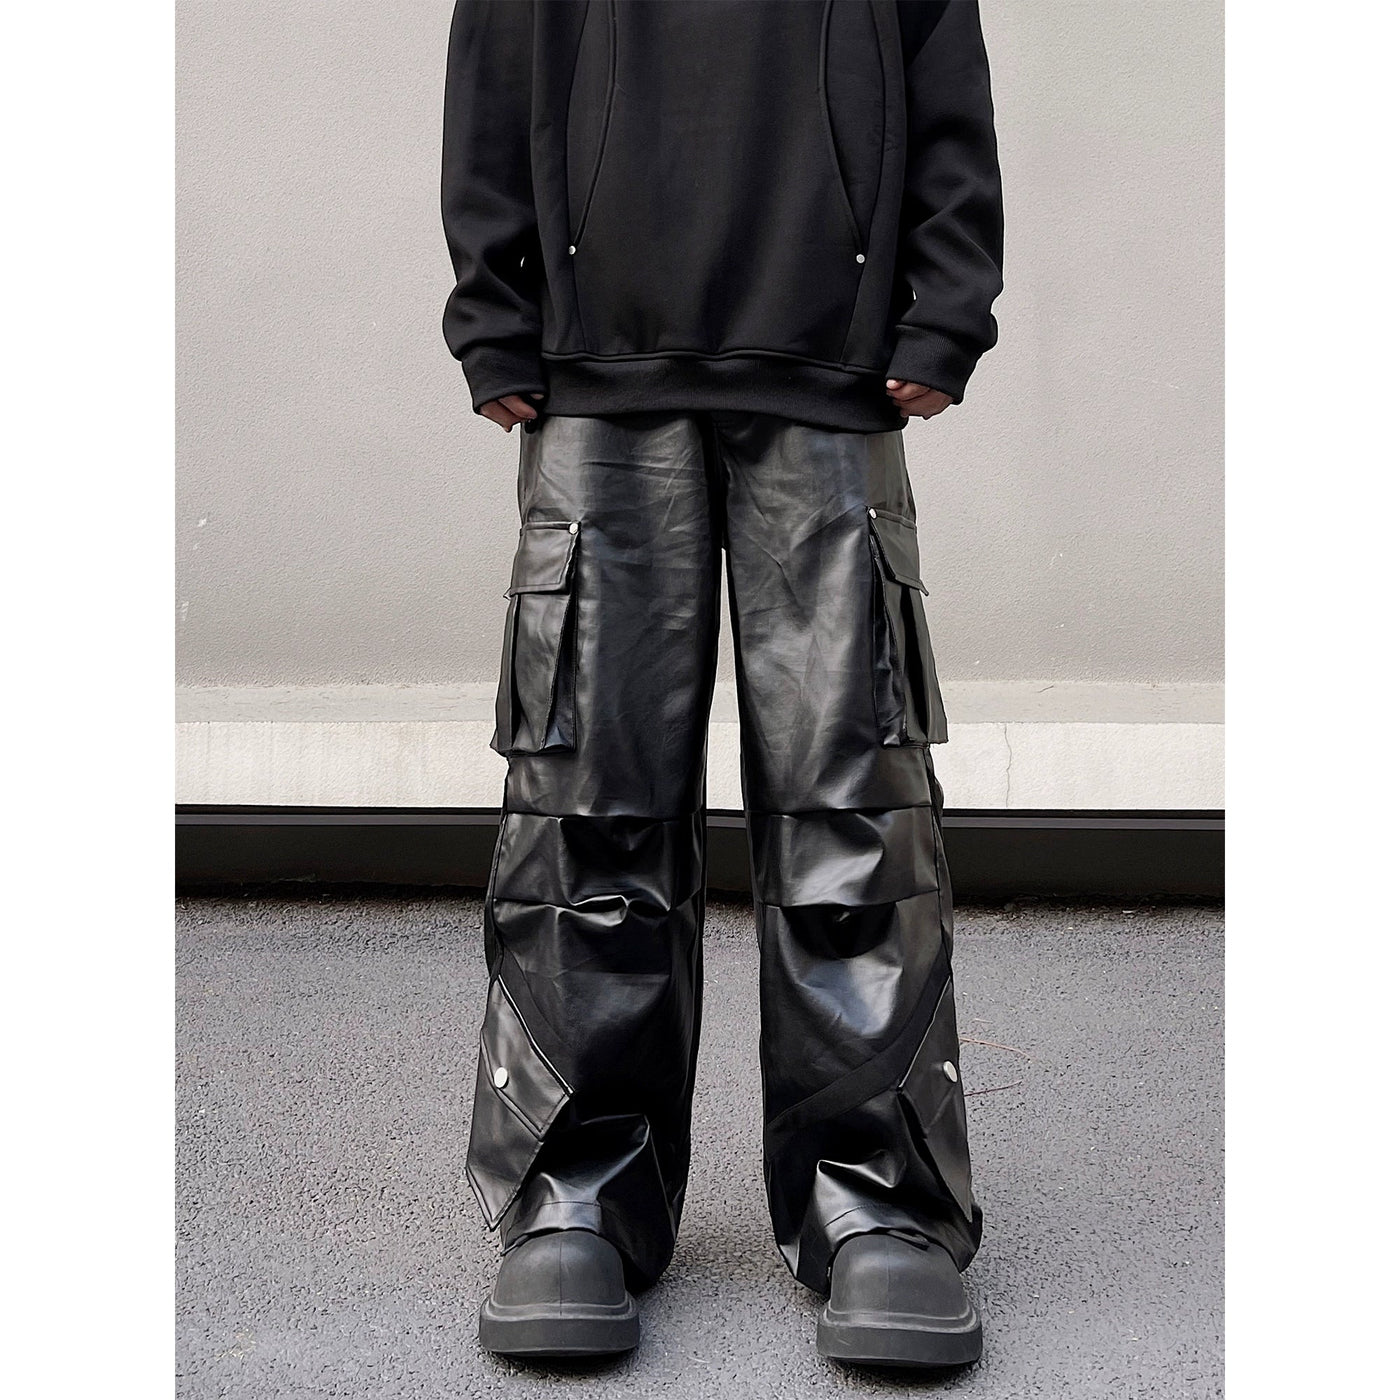 Pleated Wide Cargo Leather Pants Korean Street Fashion Pants By Blacklists Shop Online at OH Vault